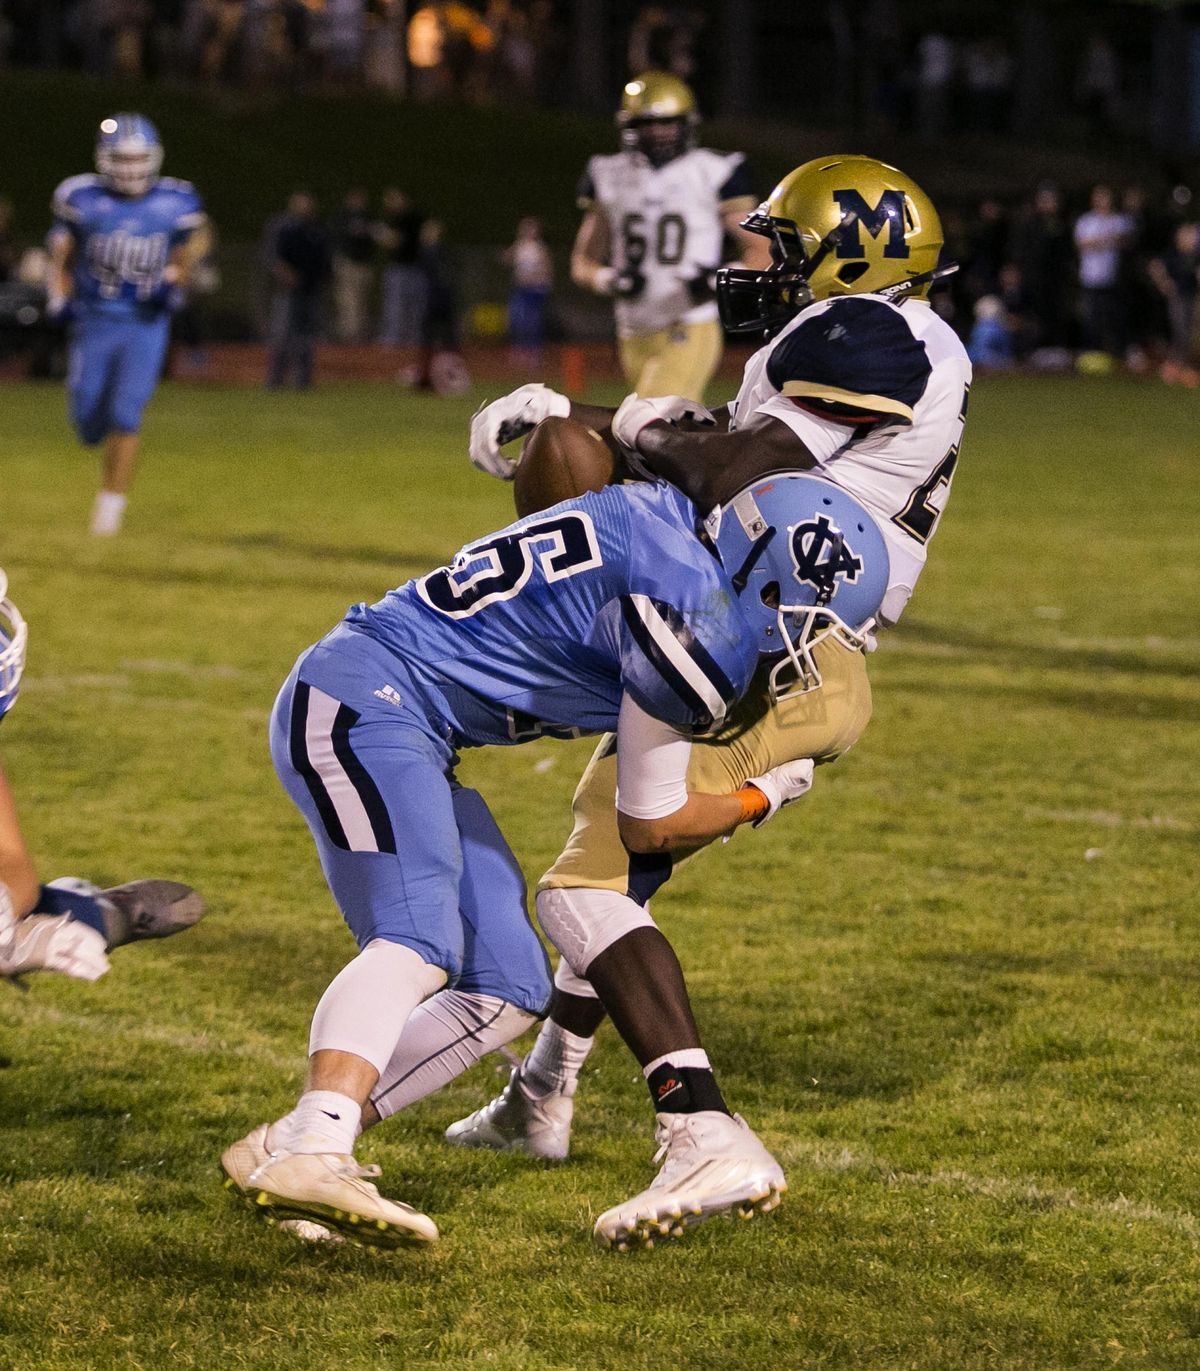 Central Valley’s Brayden Hamilton hits Mead’s EJ Bade to force a fumble during the second quarter Friday night at Central Valley High School. (BRUCE TWITCHELL / Special to The Spokesman-Review)